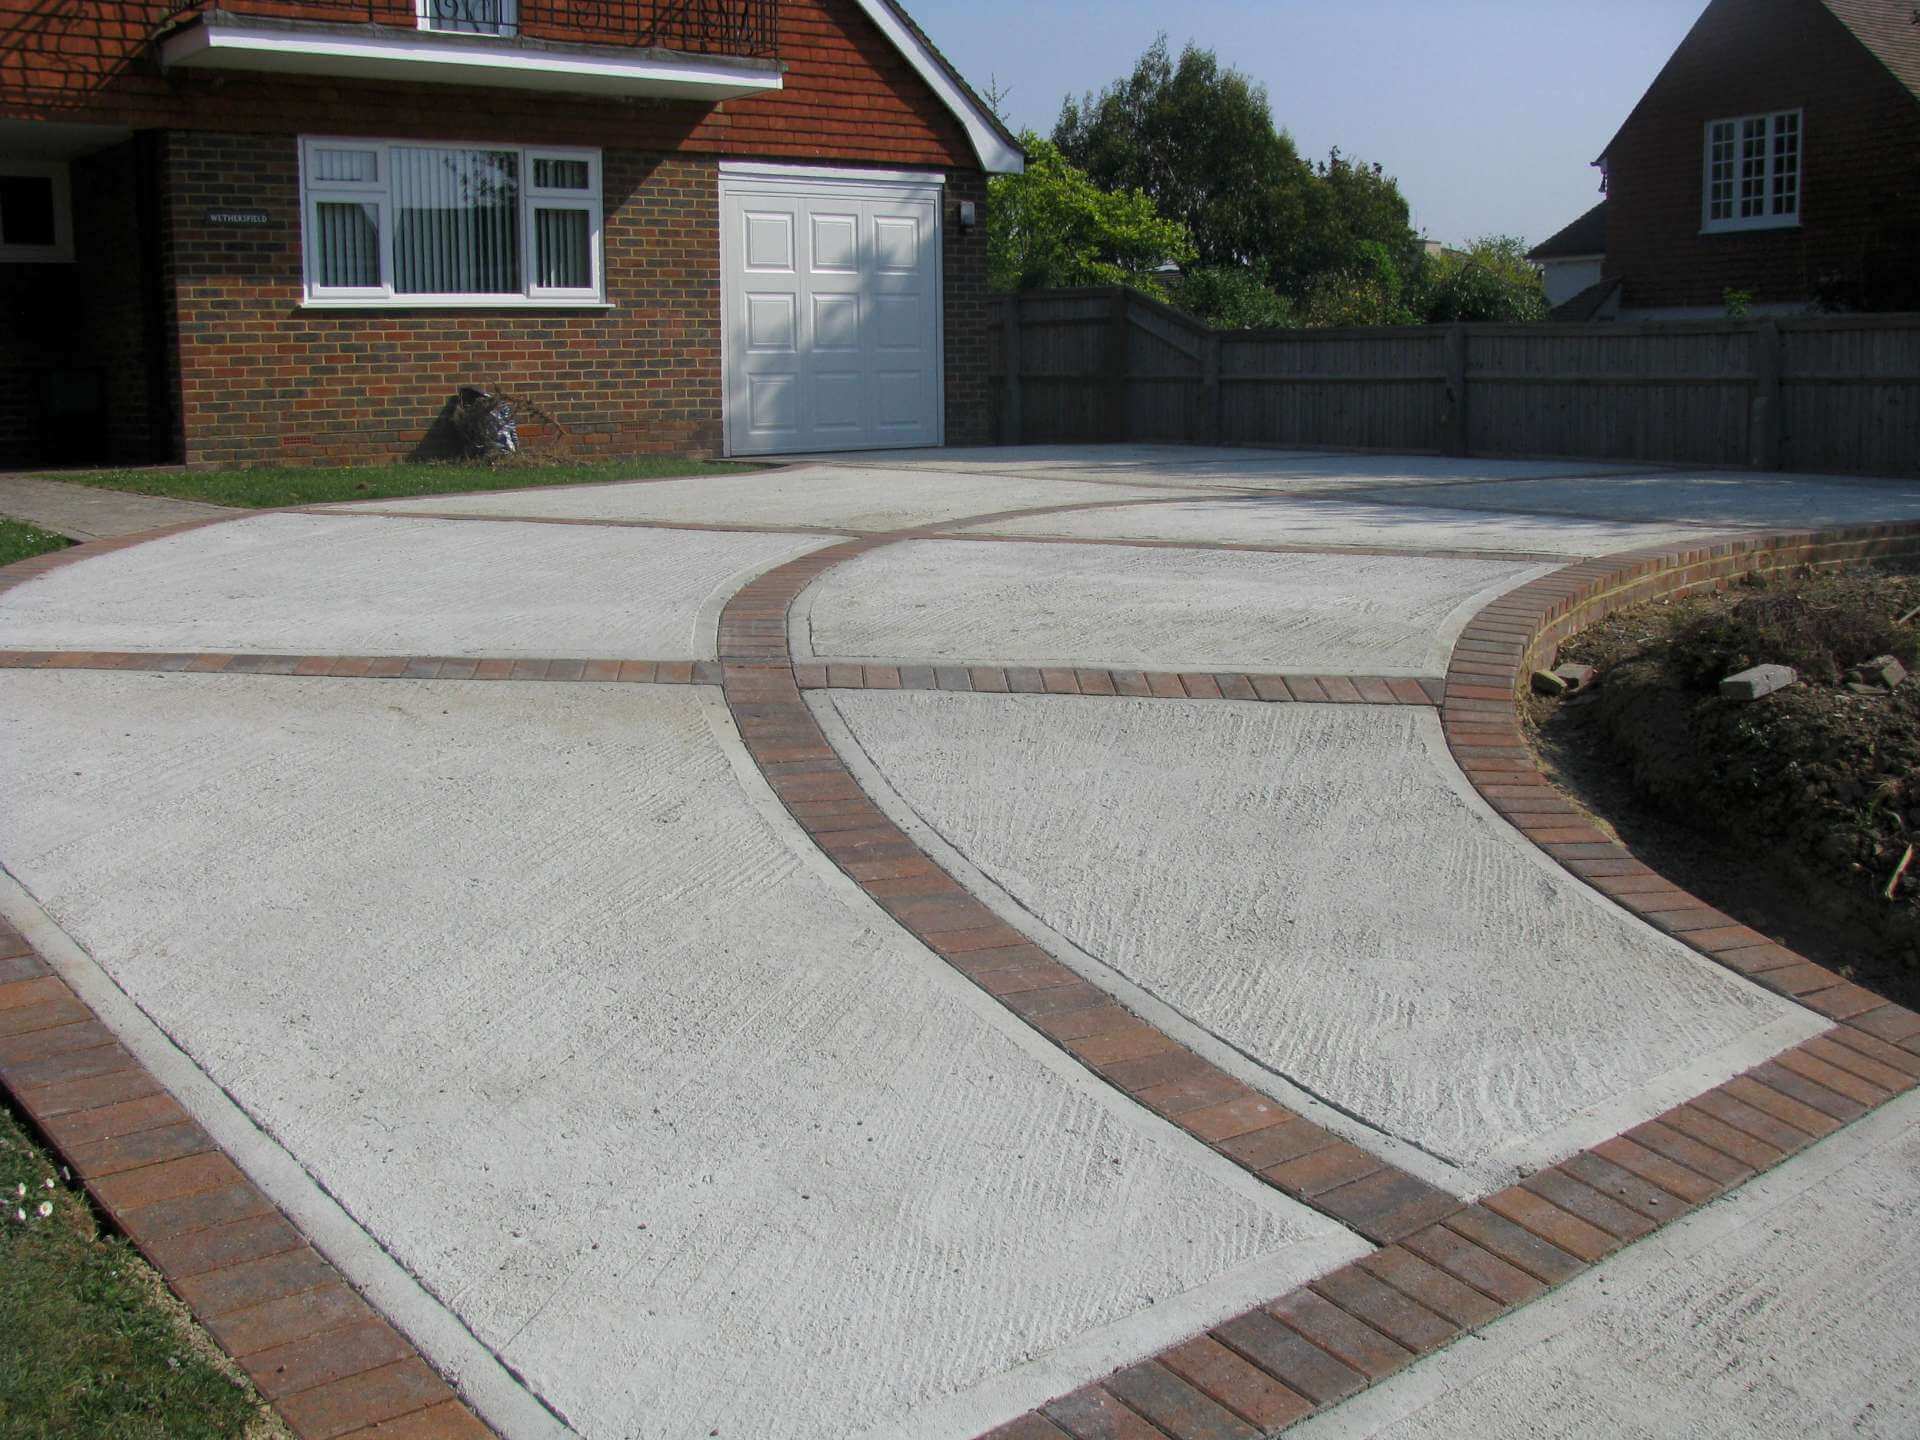 A driveway with a brick walkway and a garage in the background
